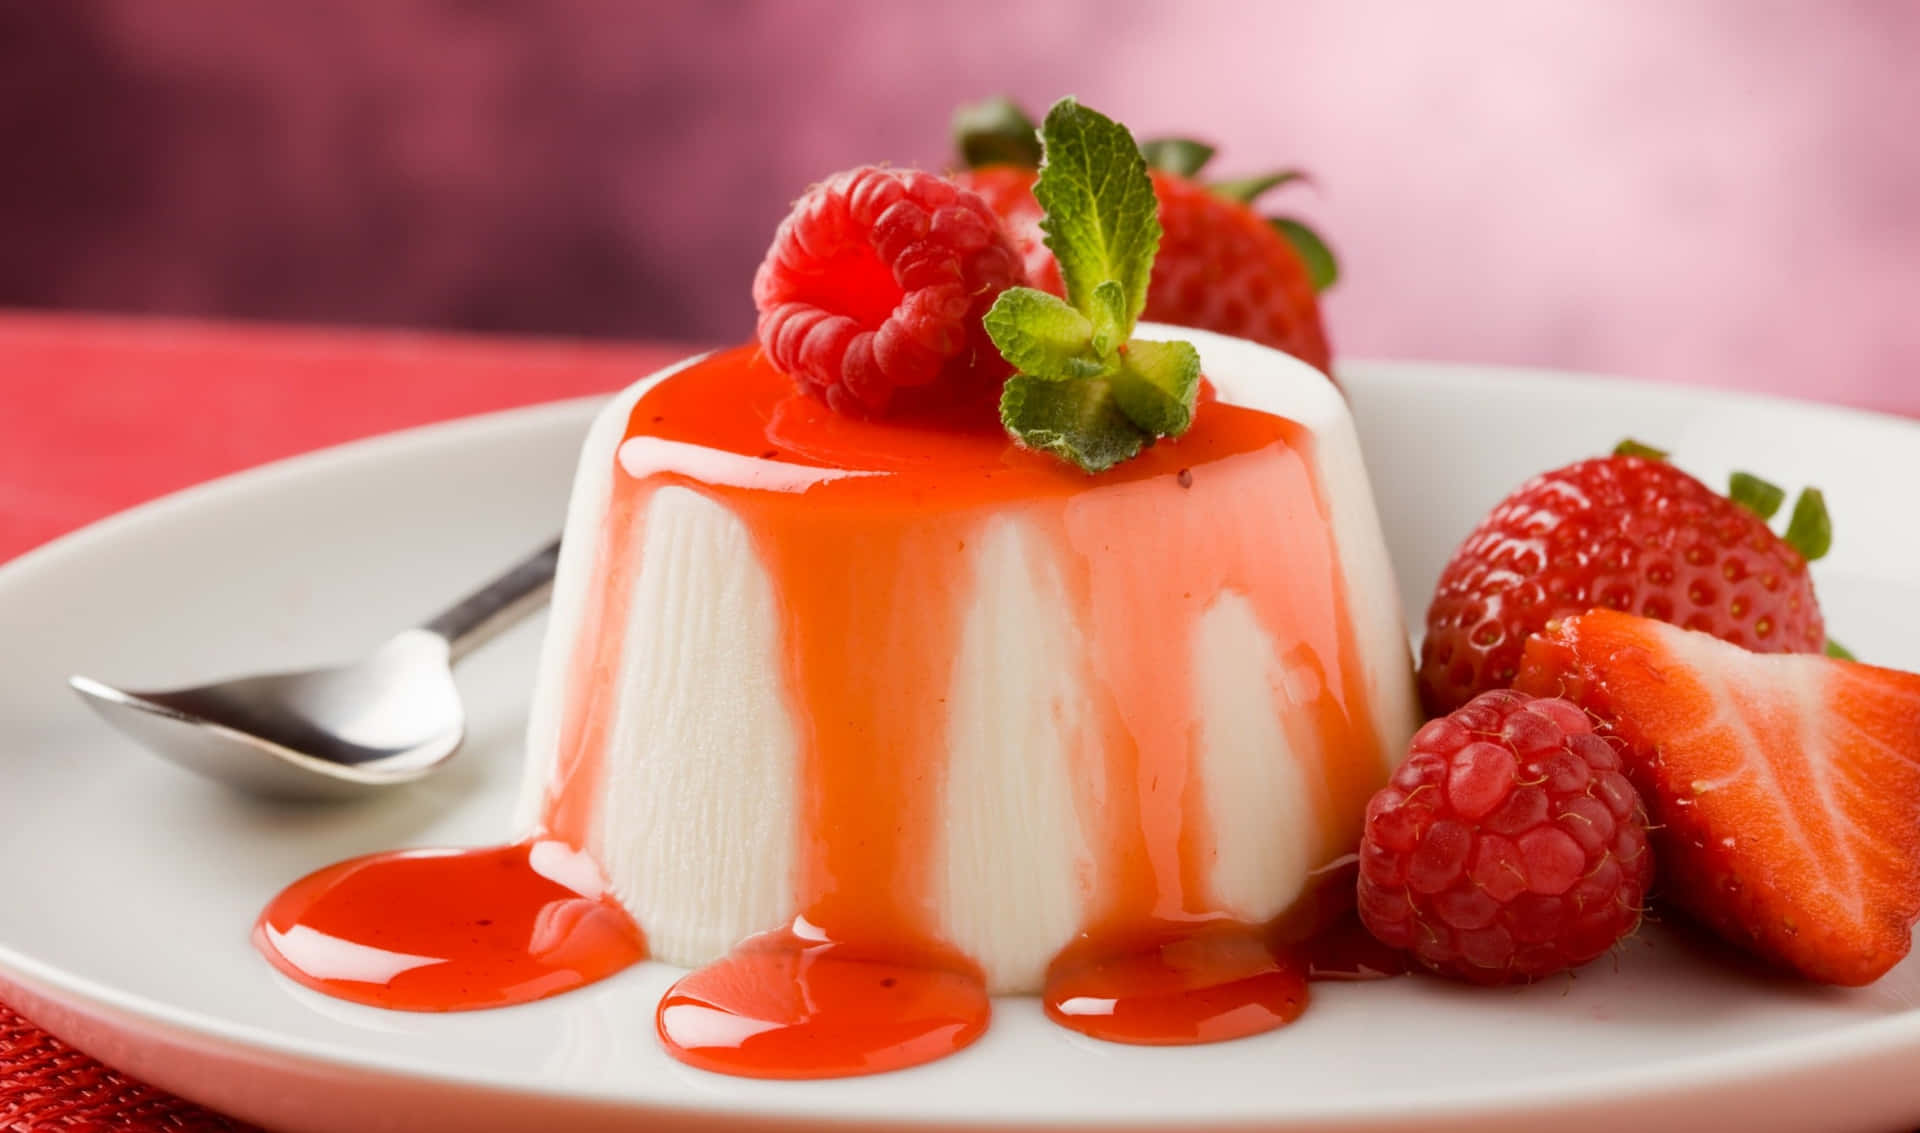 A Plate With A Dessert With Strawberries And Sauce